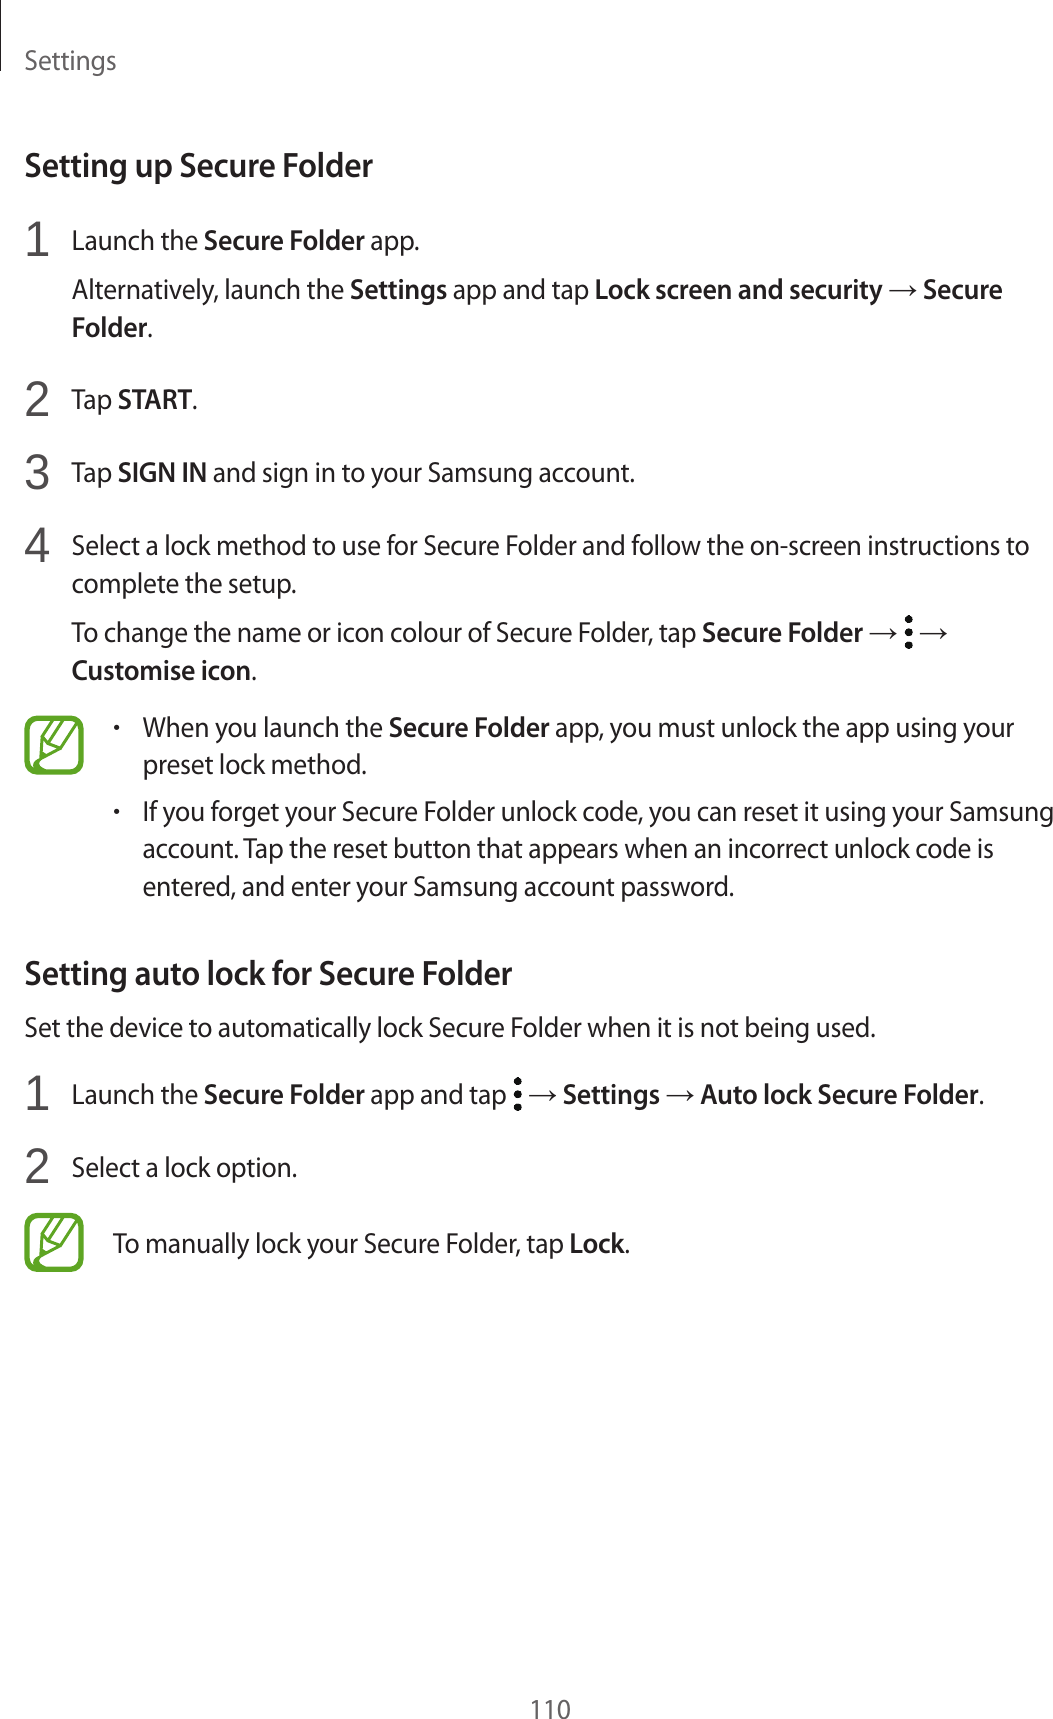 Settings110Setting up Secure Folder1  Launch the Secure Folder app.Alternatively, launch the Settings app and tap Lock screen and security → Secure Folder.2  Tap START.3  Tap SIGN IN and sign in to your Samsung account.4  Select a lock method to use for Secure Folder and follow the on-screen instructions to complete the setup.To change the name or icon colour of Secure Folder, tap Secure Folder →   → Customise icon.•When you launch the Secure Folder app, you must unlock the app using your preset lock method.•If you forget your Secure Folder unlock code, you can reset it using your Samsung account. Tap the reset button that appears when an incorrect unlock code is entered, and enter your Samsung account password.Setting auto lock for Secure FolderSet the device to automatically lock Secure Folder when it is not being used.1  Launch the Secure Folder app and tap   → Settings → Auto lock Secure Folder.2  Select a lock option.To manually lock your Secure Folder, tap Lock.